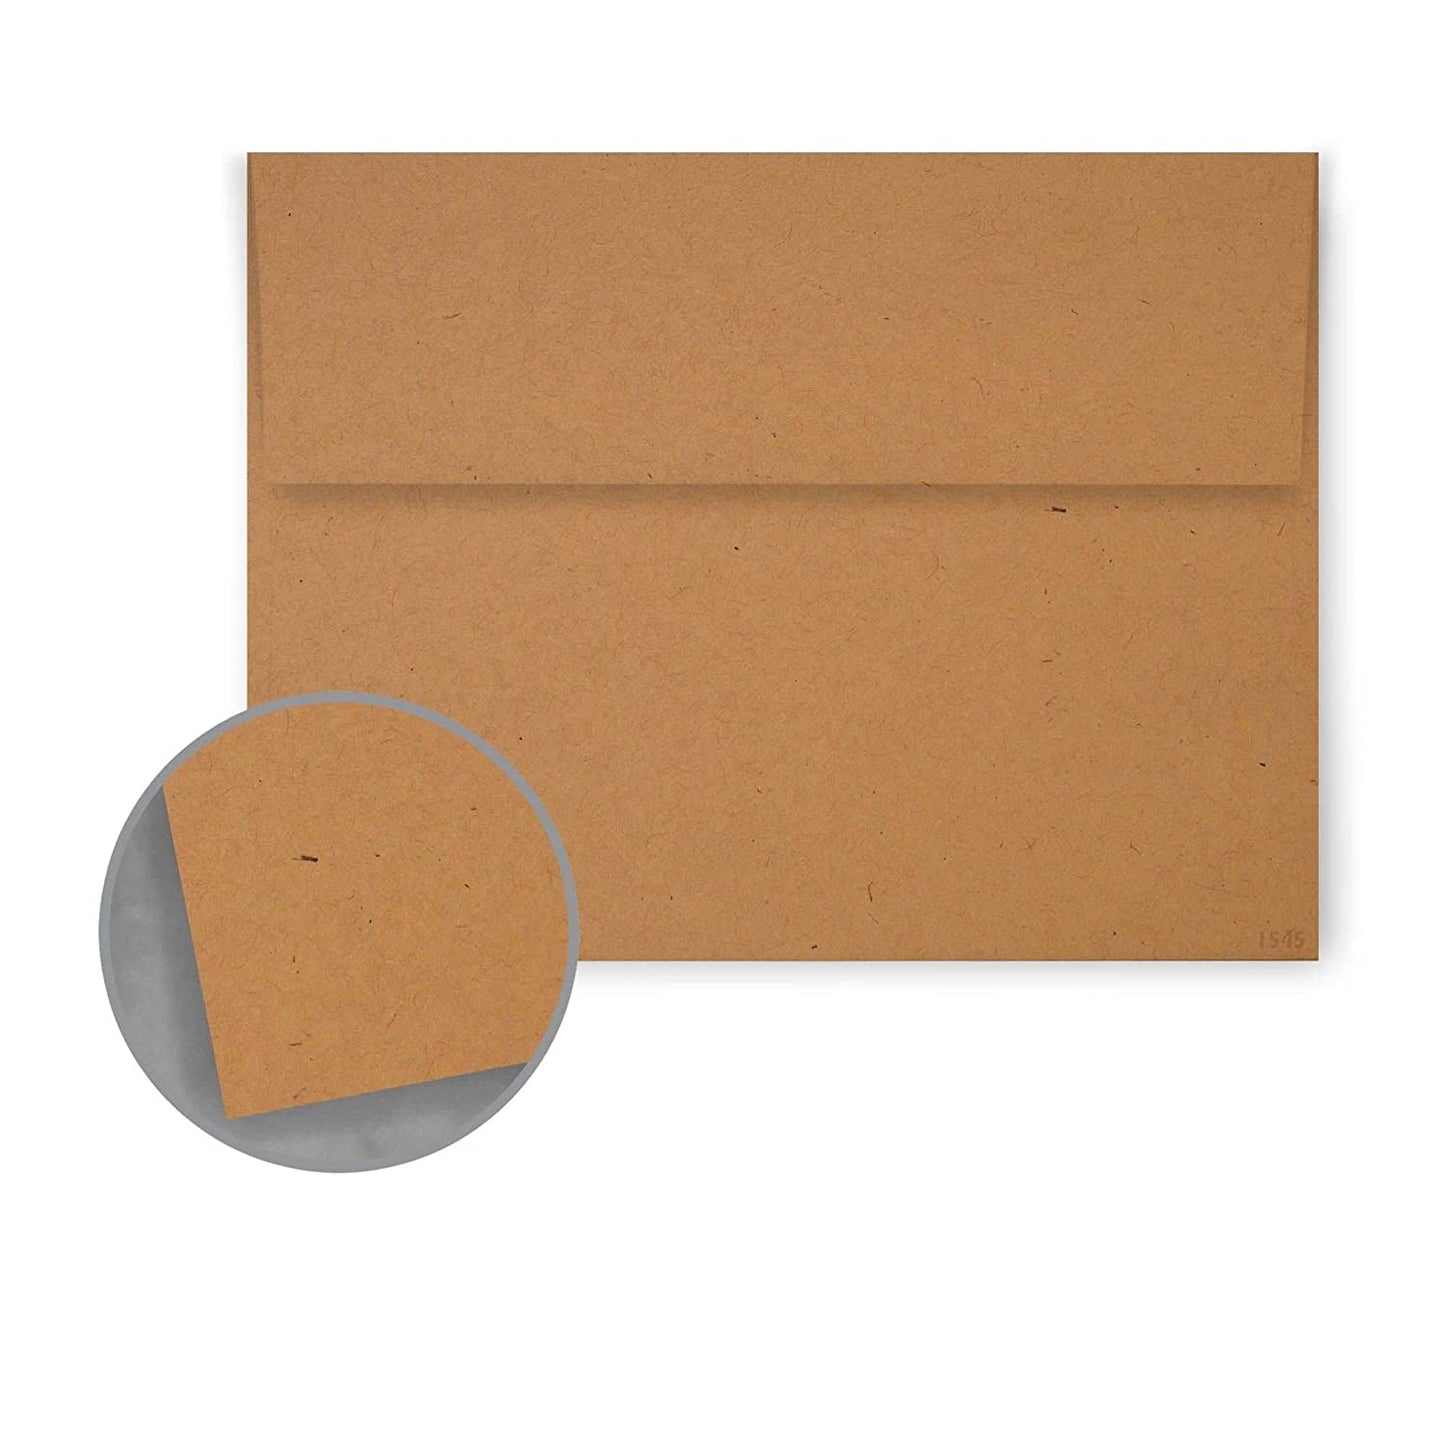 Accuprints Brown Craft Envelopes | Size - 6 by 9 inch